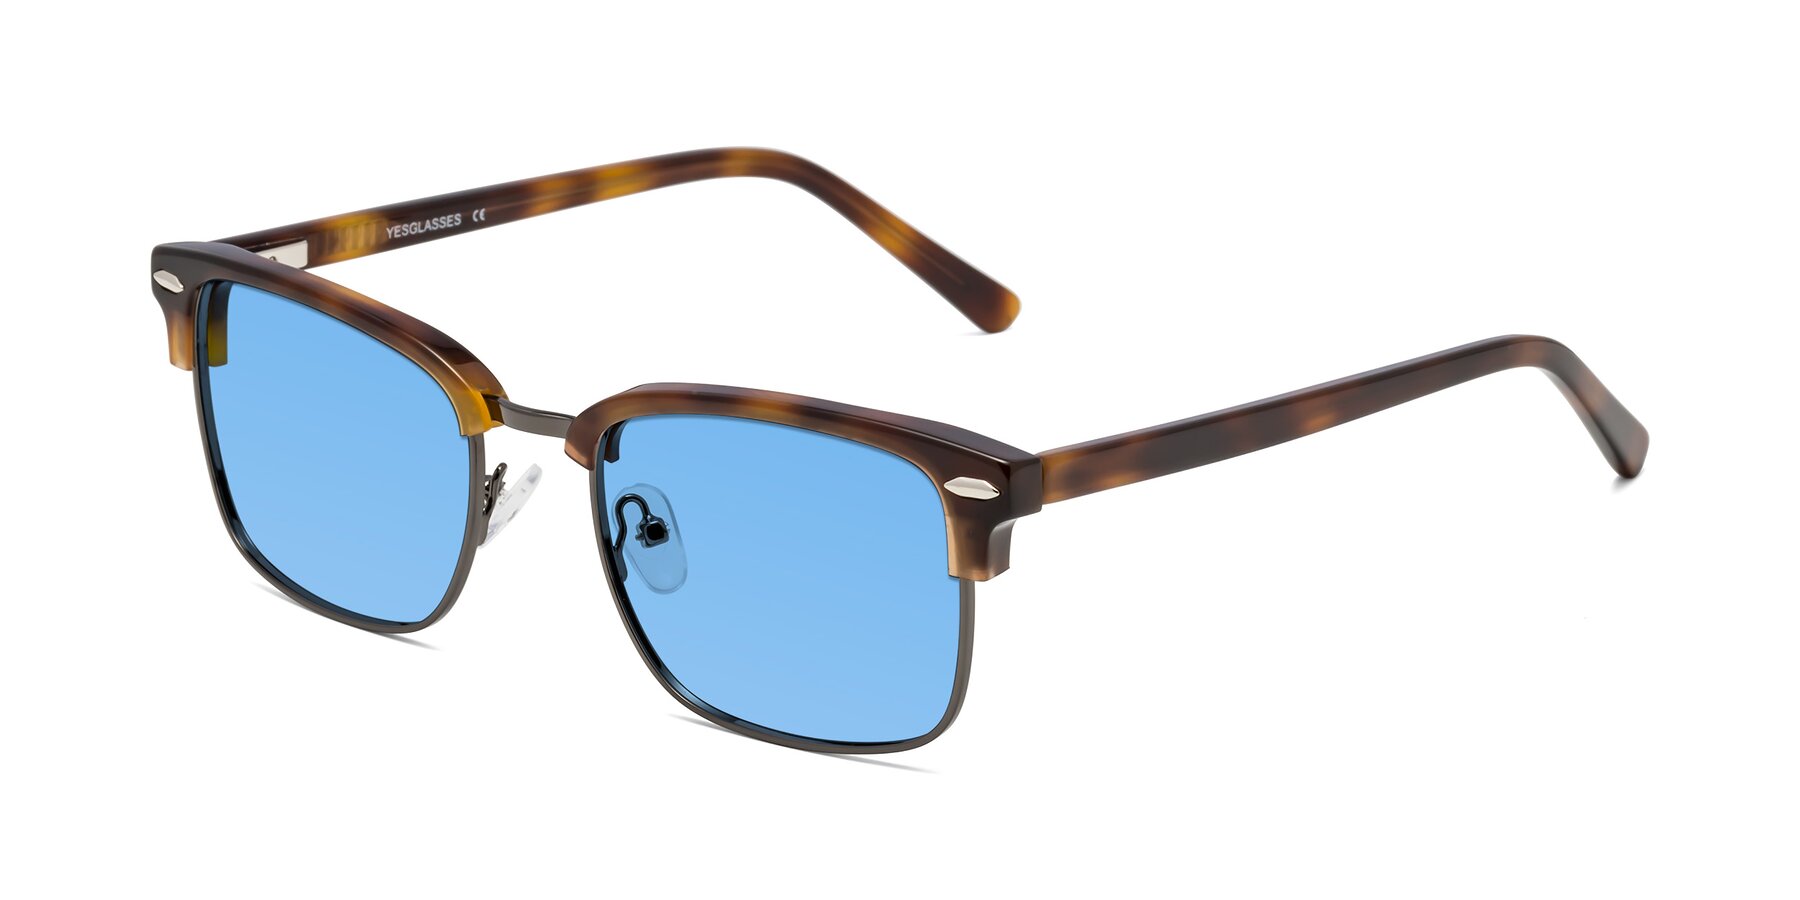 Angle of 17464 in Tortoise/ Gunmetal with Medium Blue Tinted Lenses